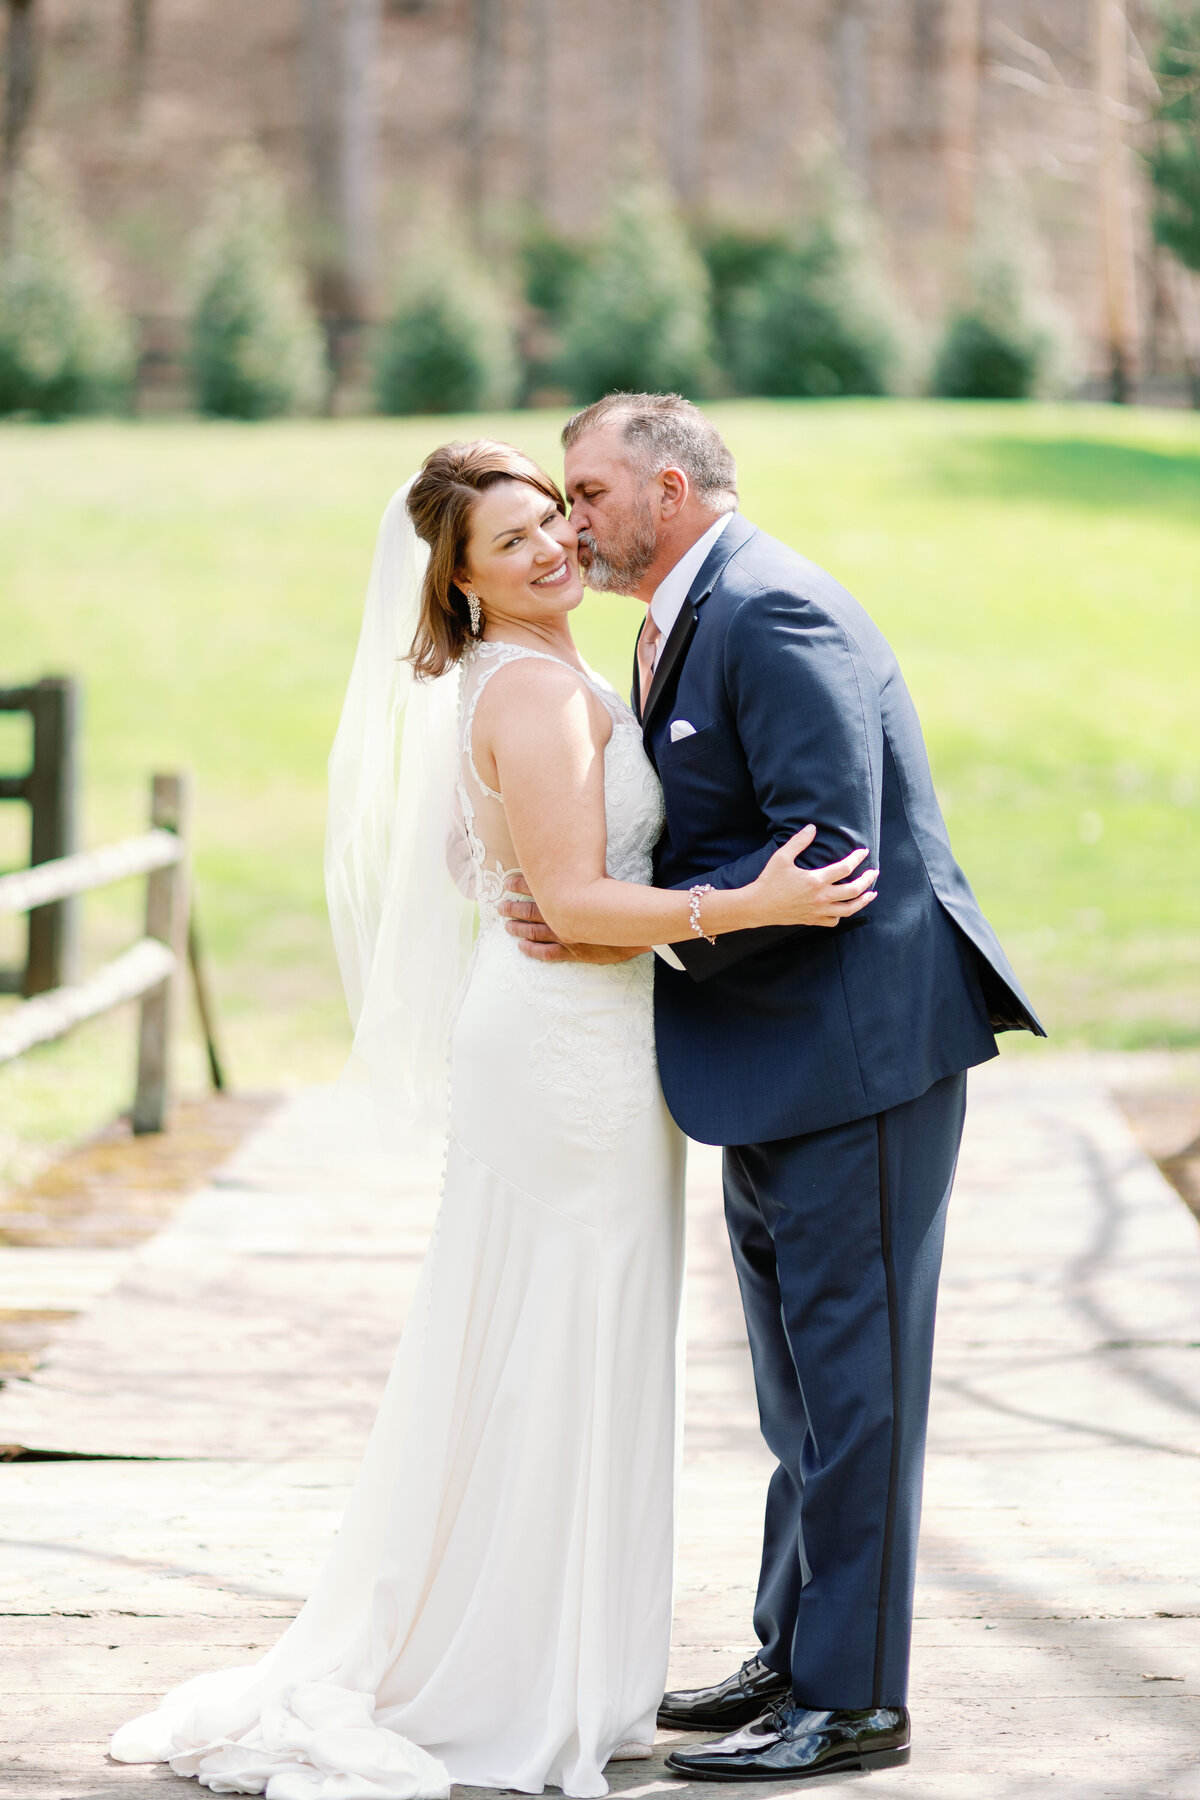 Julie and Robert Wedding Day - The Stables at Strawberry Creek - East Tennessee Wedding Photographer - Alaina René Photograhpy-81